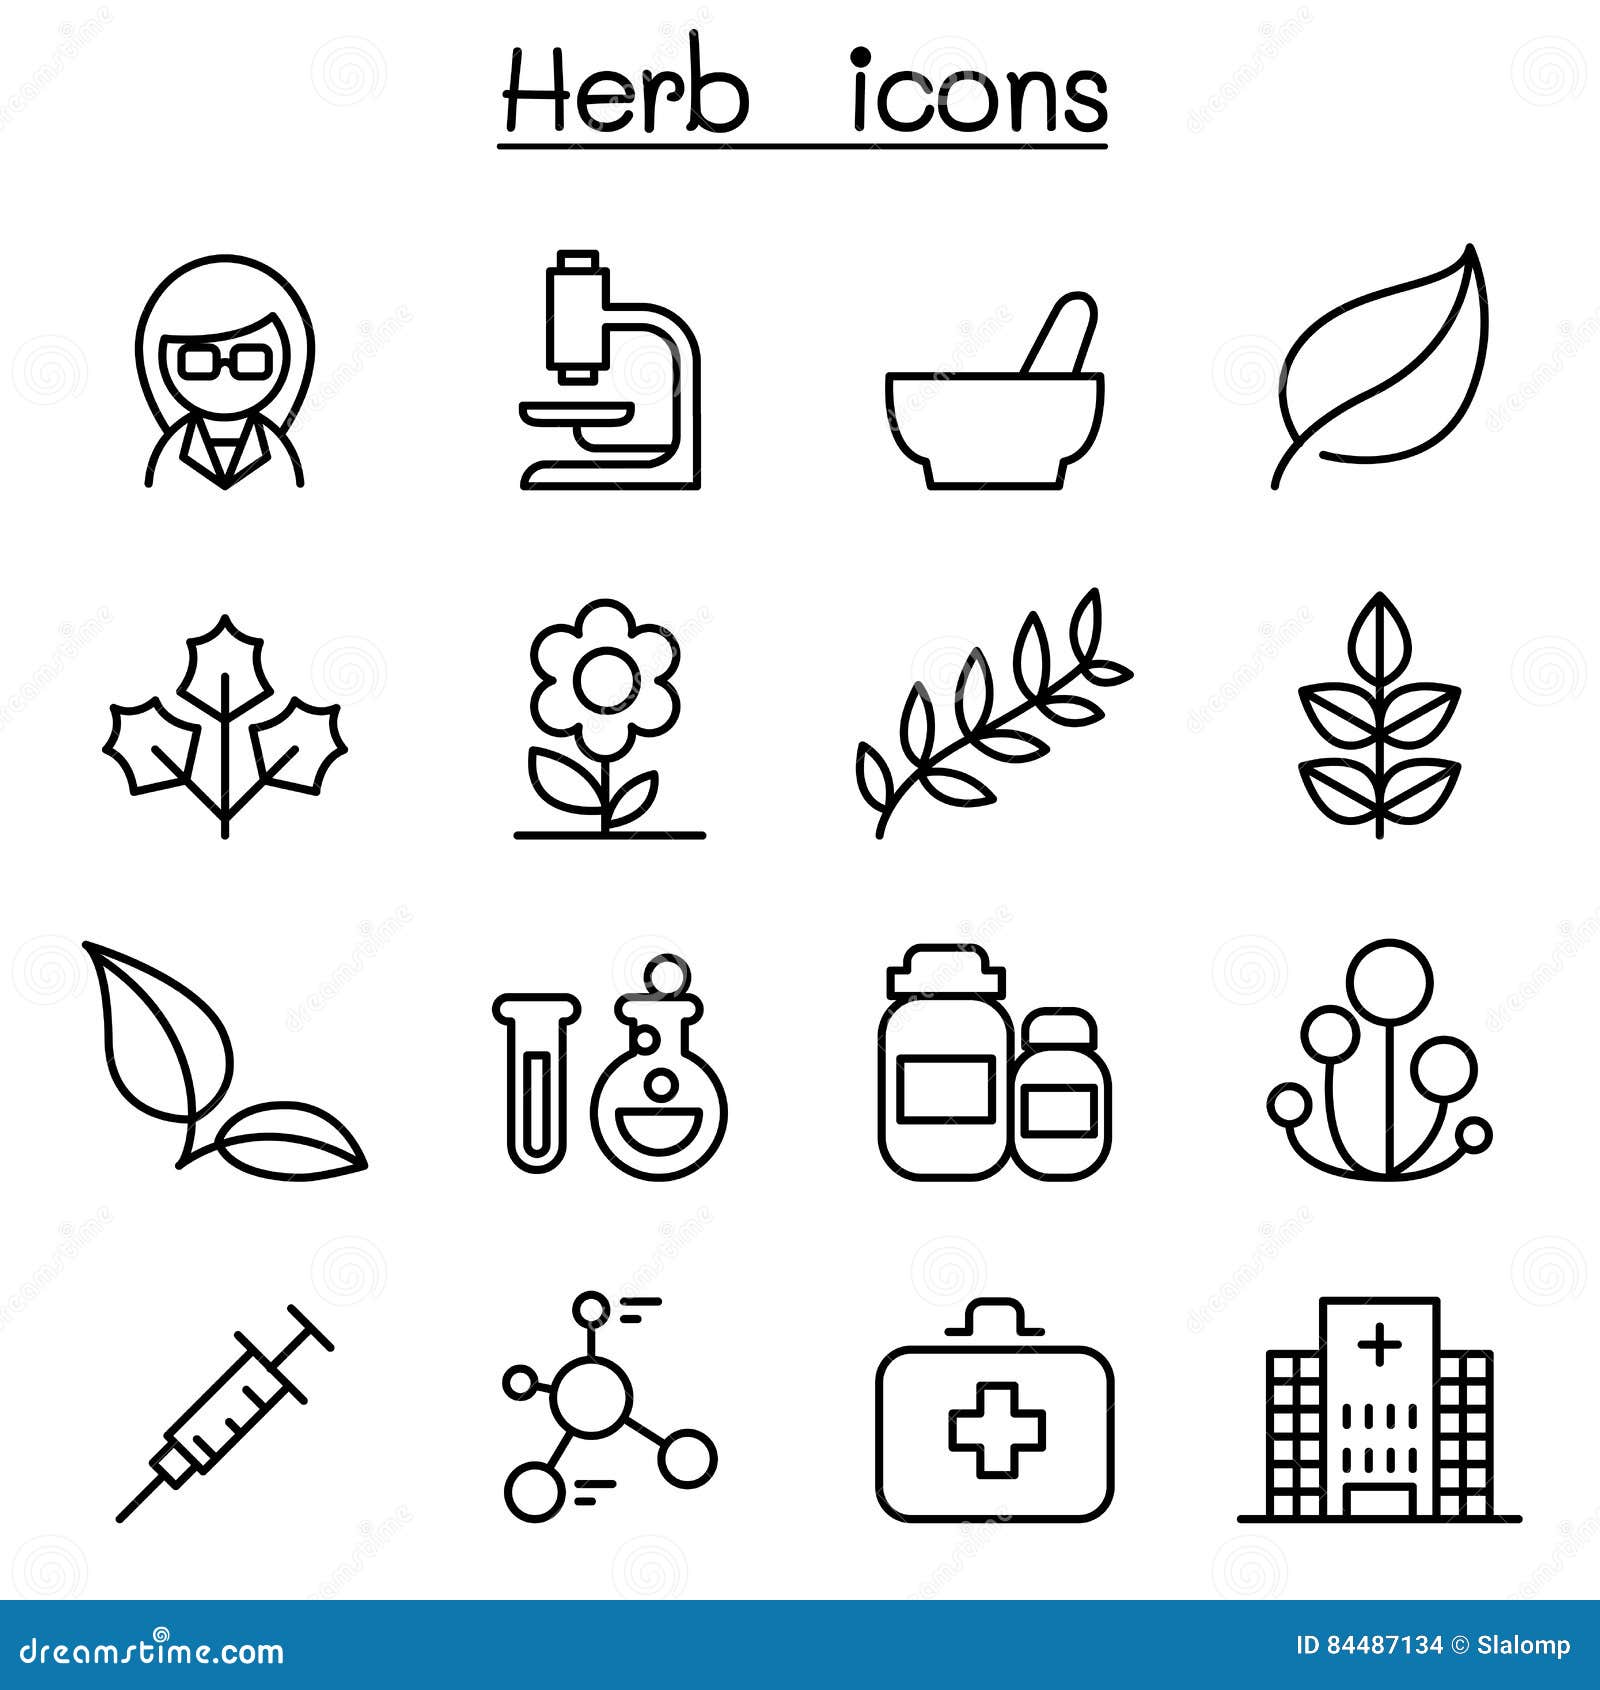 herb icon set in thin line style